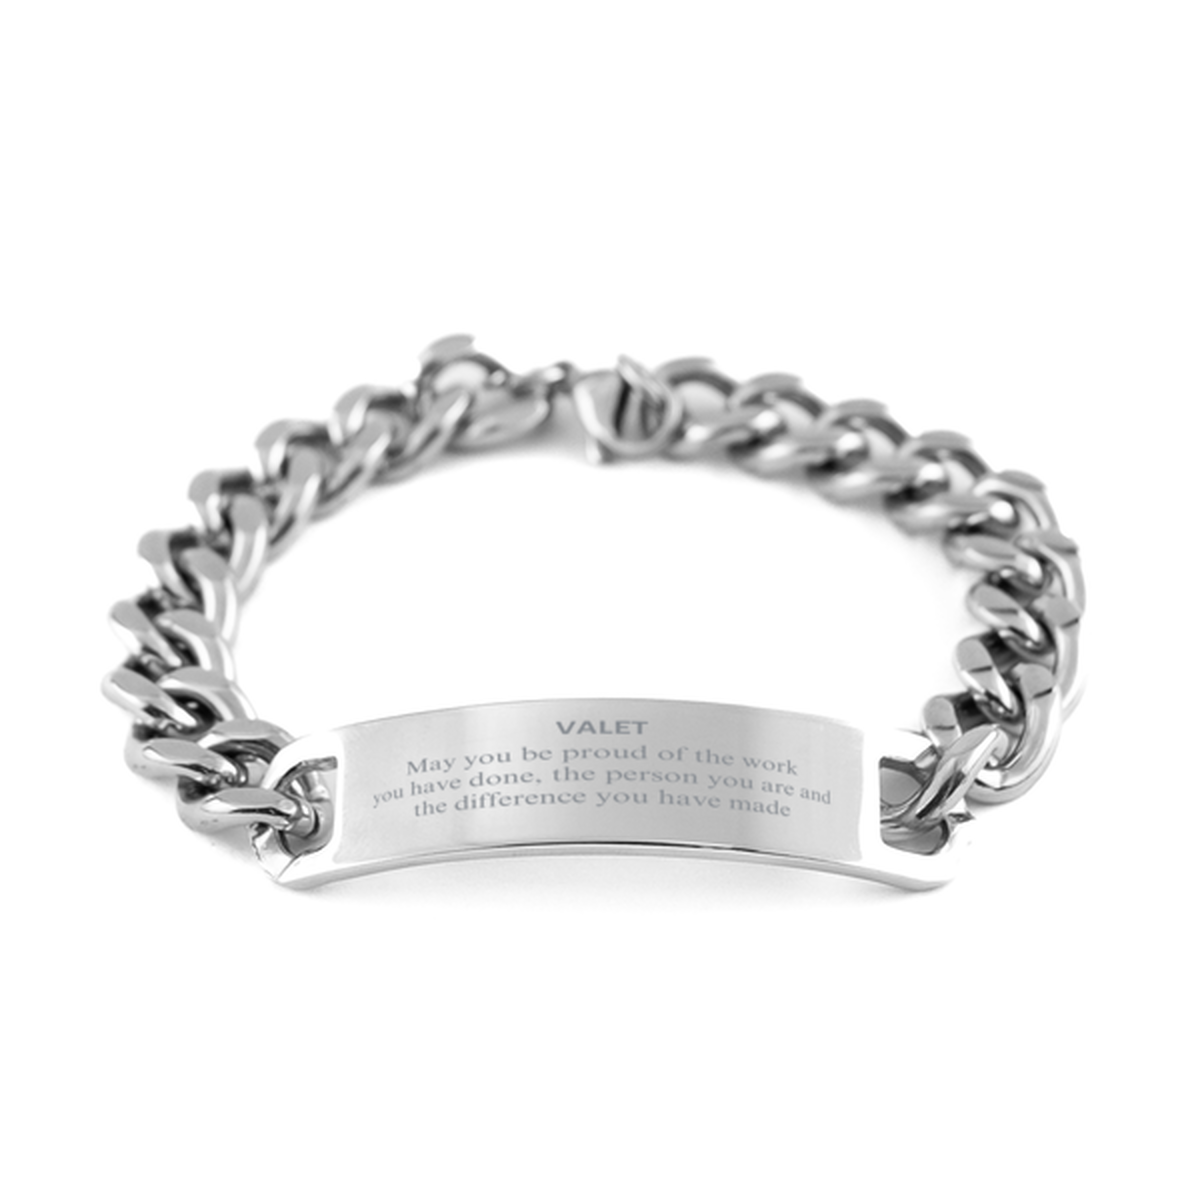 Valet May you be proud of the work you have done, Retirement Valet Cuban Chain Stainless Steel Bracelet for Colleague Appreciation Gifts Amazing for Valet